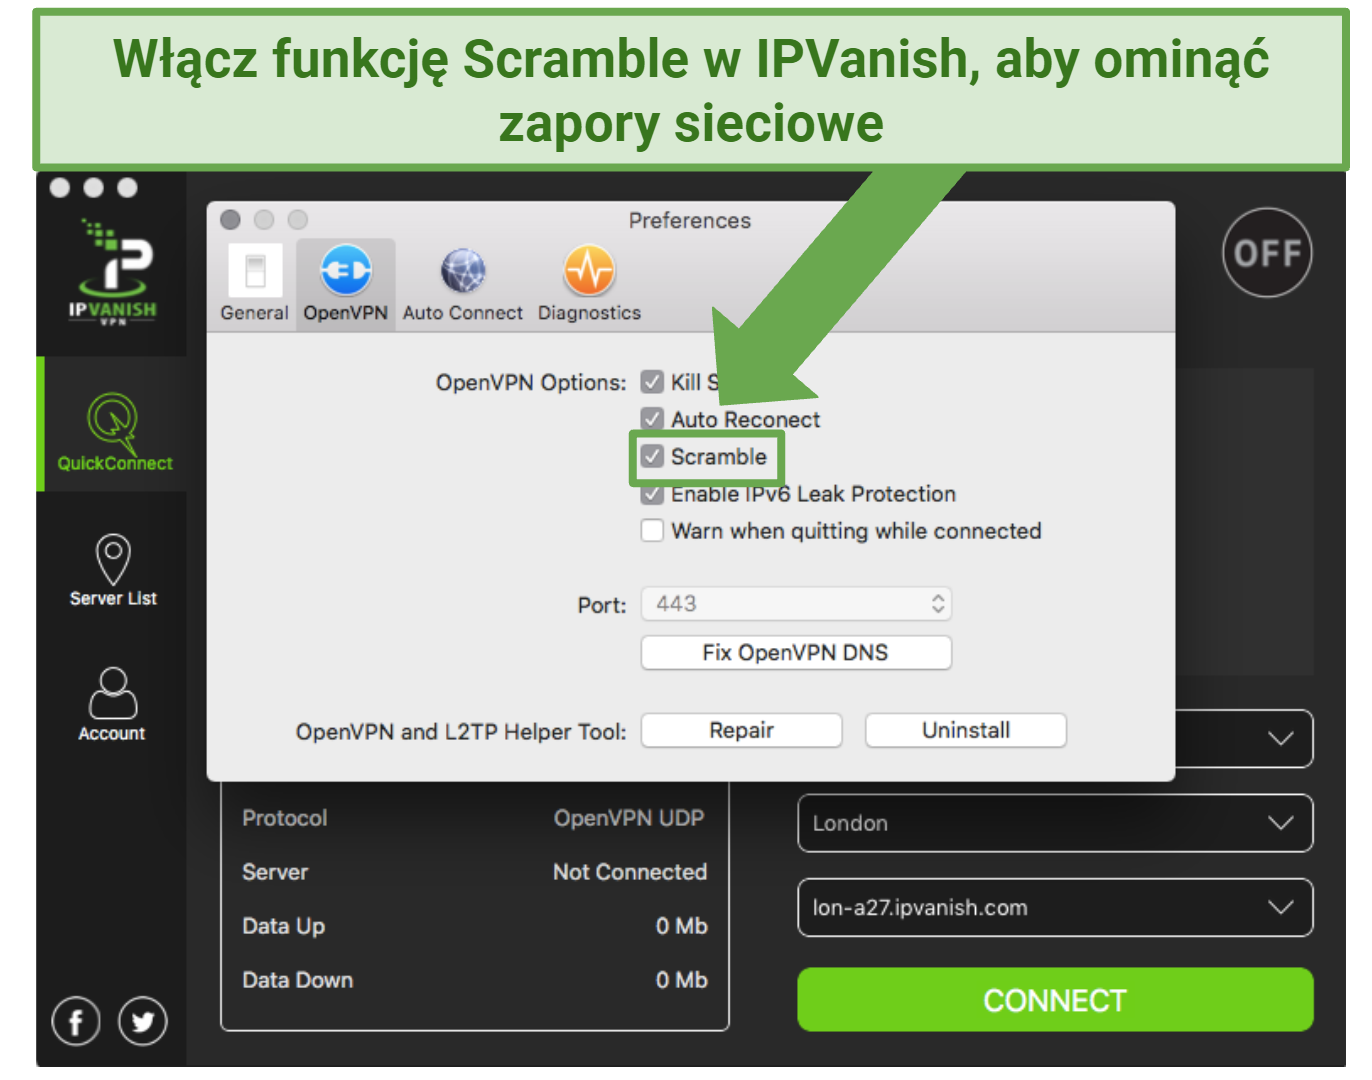 A screenshot of the IPVanish app security settings, showing the Scramble feature toggled on